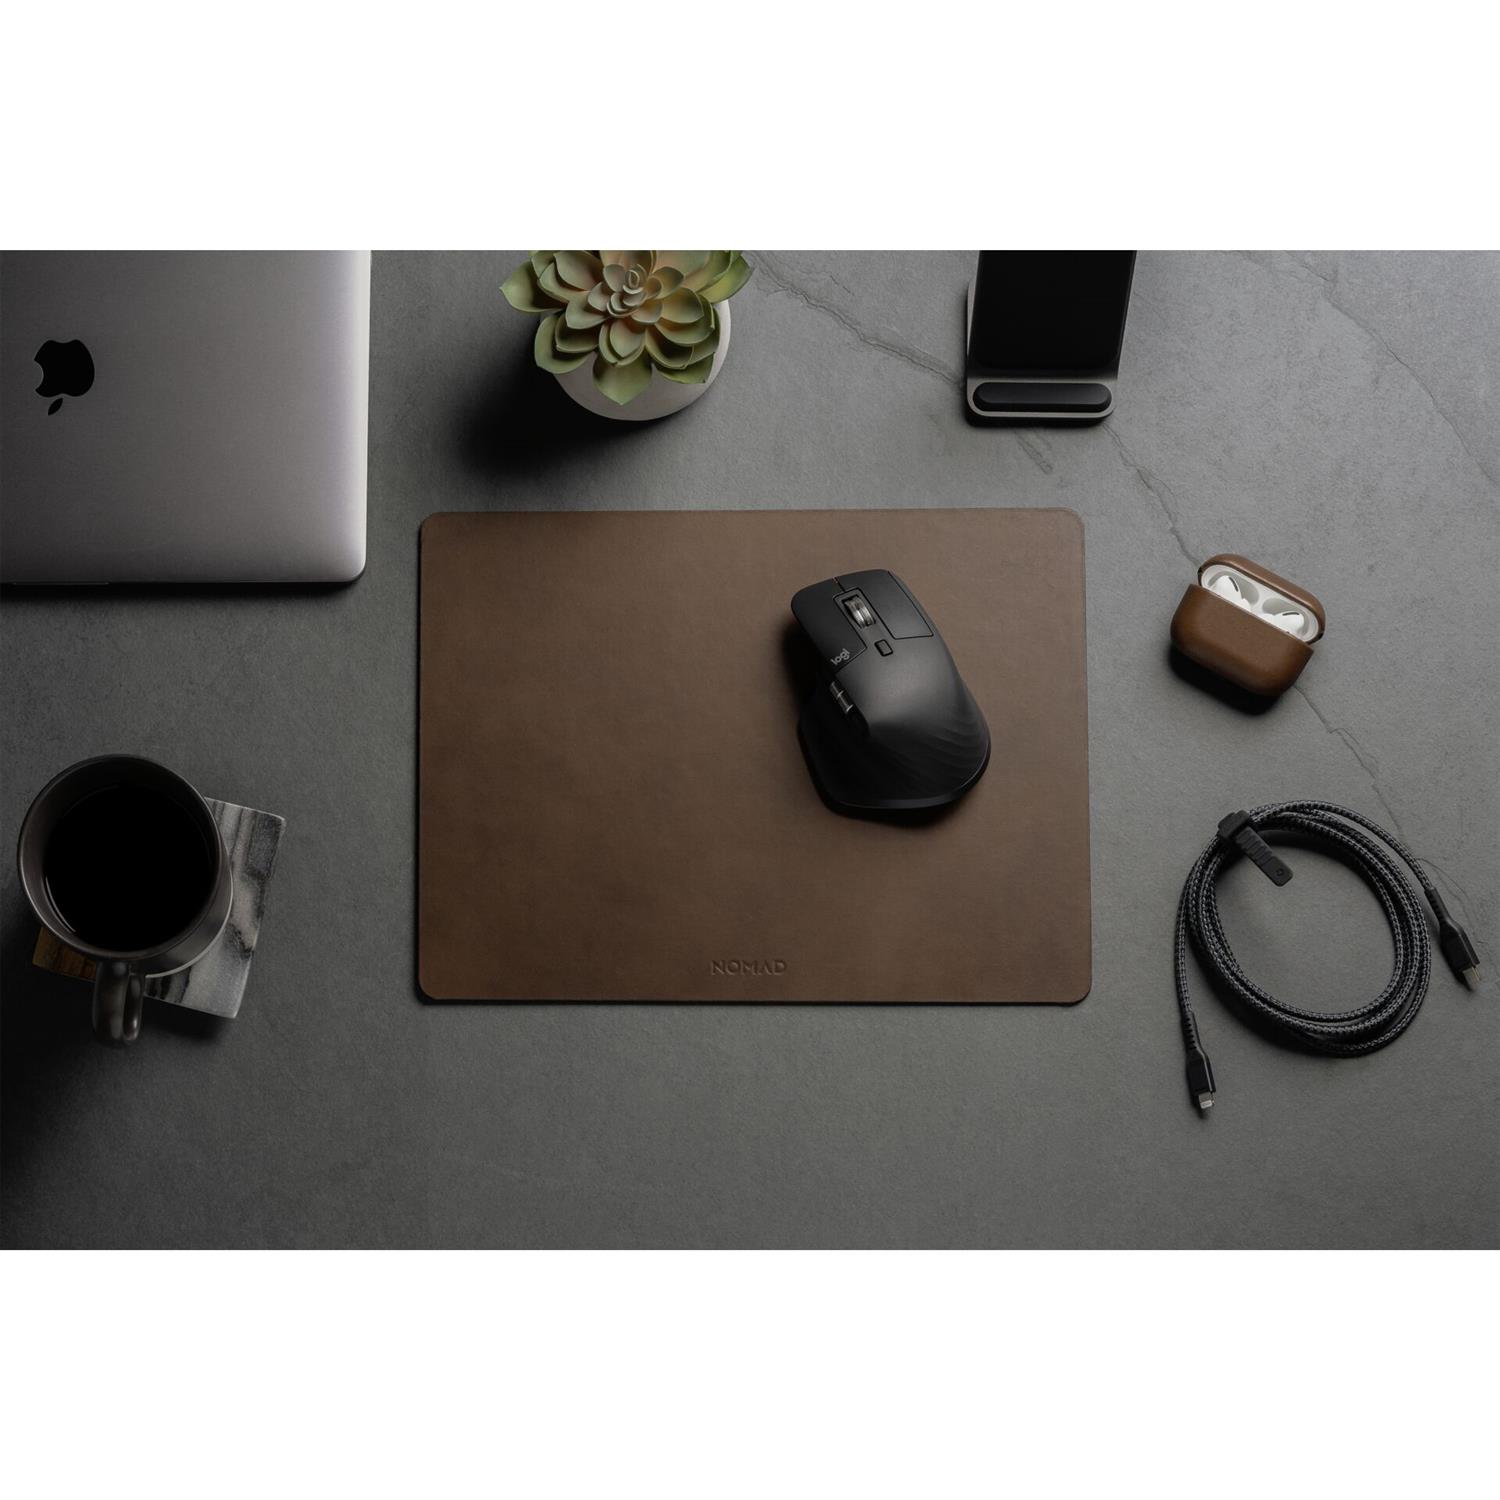 Nomad Mousepad Leather 16-Inch - Rustic Brown